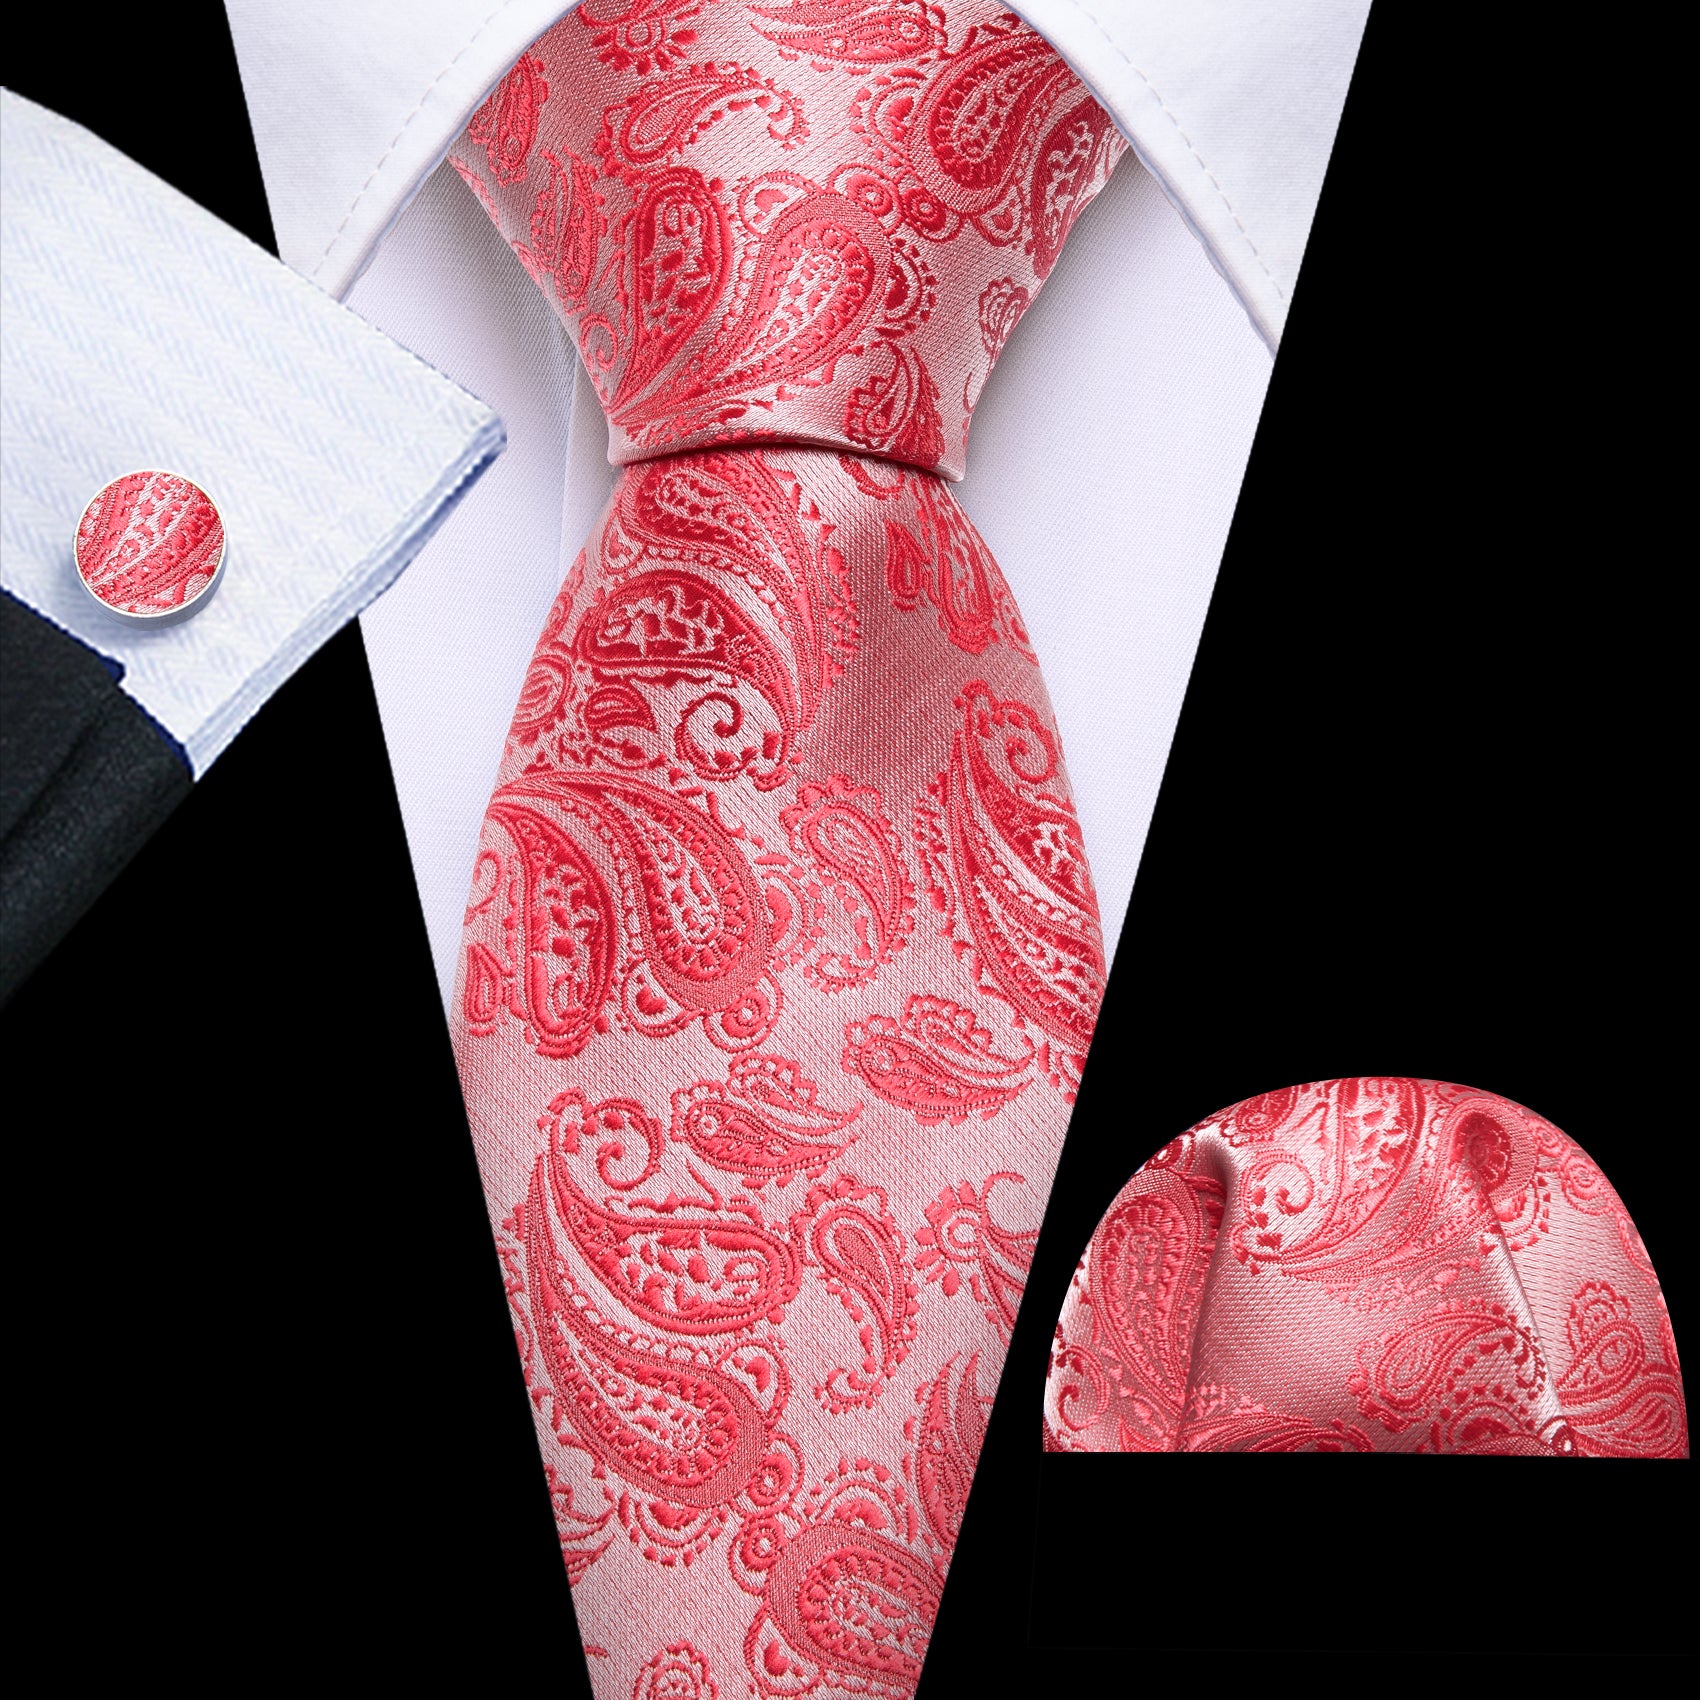 Indian Red Paisley Silk 63 Inches Extra Long Tie Hanky Cufflinks Set